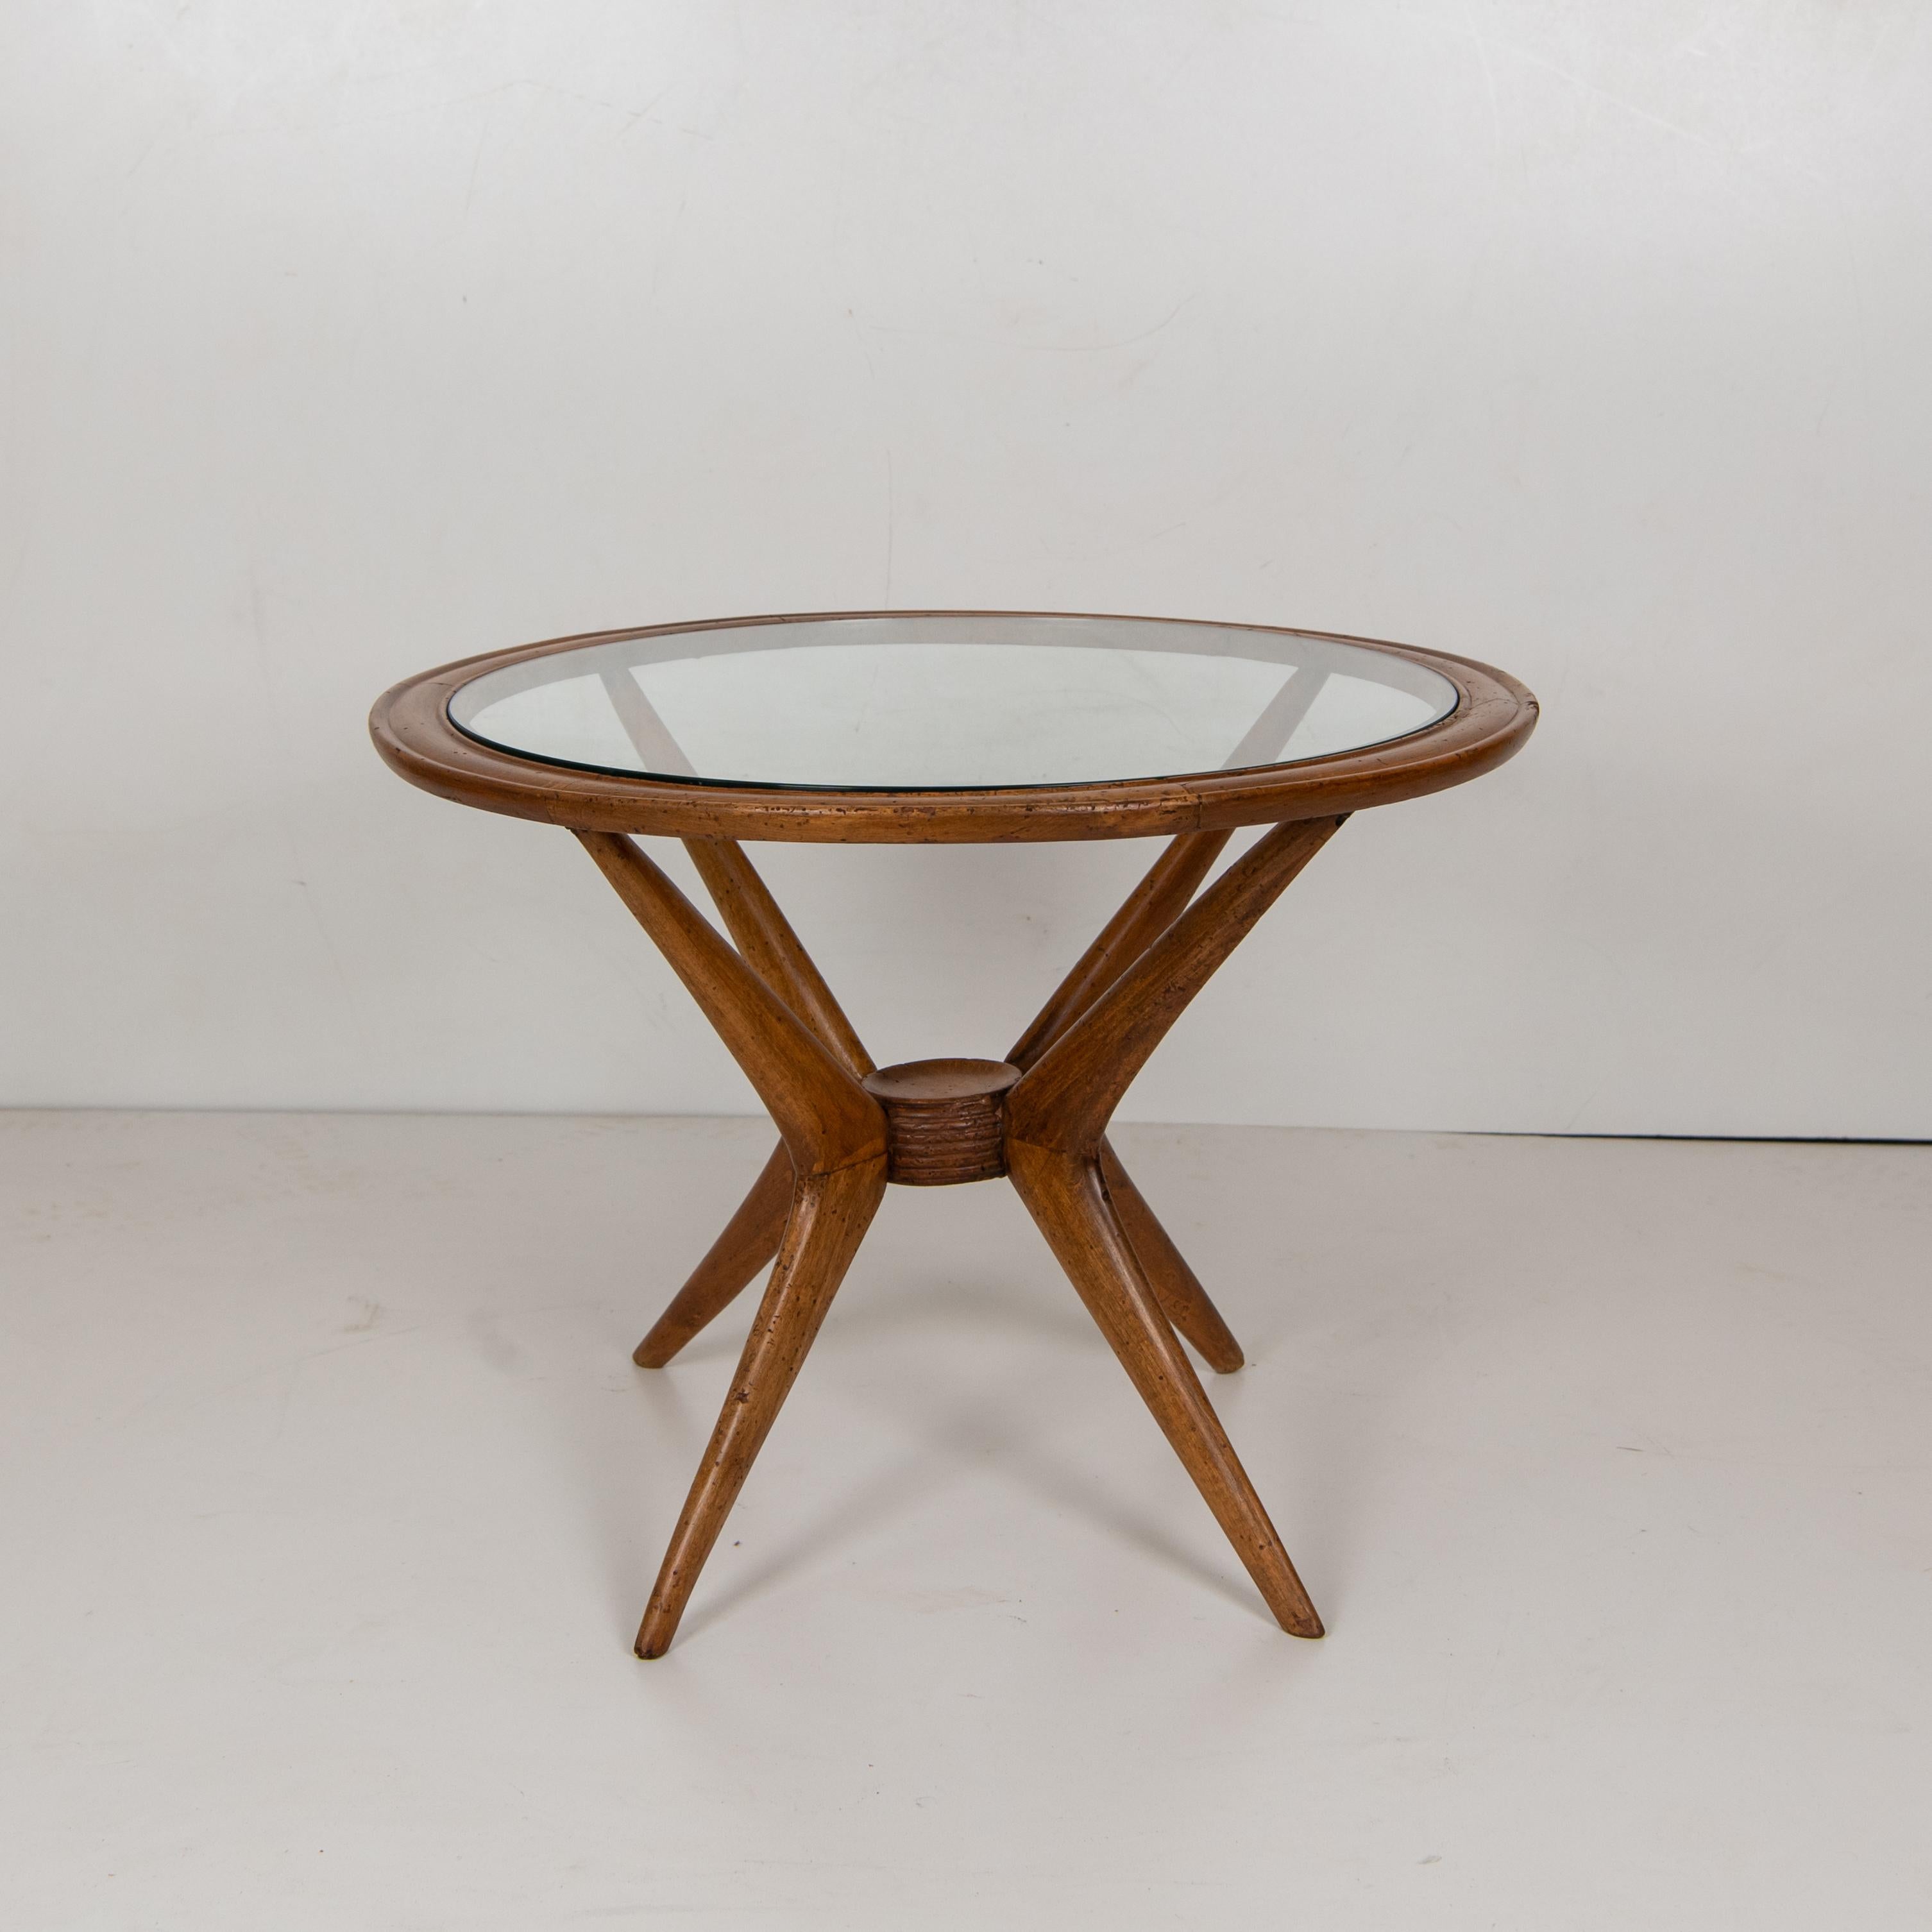 A rare a beautiful round beech wood coffee table designed by Paolo Buffa for 